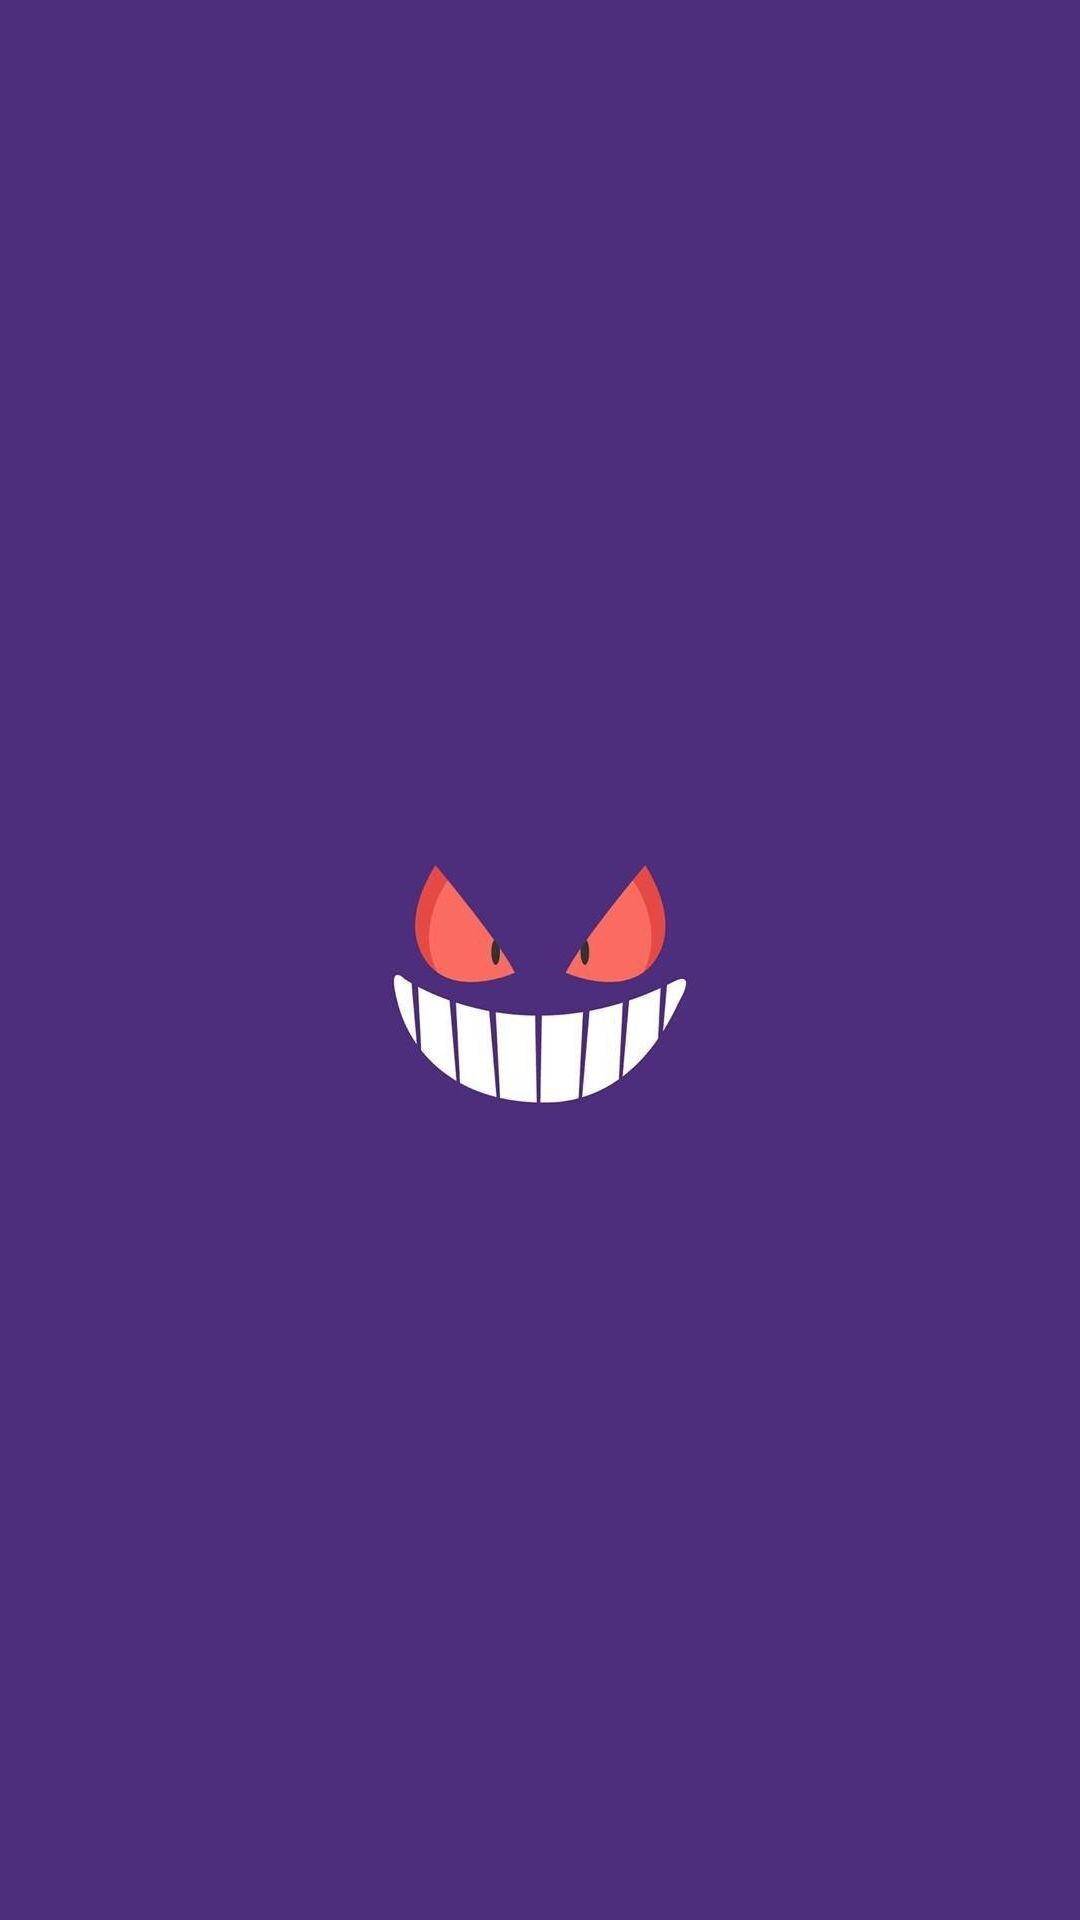 Gengar iPhone wallpapers, Stylish designs, Ghostly backgrounds, Menacing presence, 1080x1920 Full HD Phone